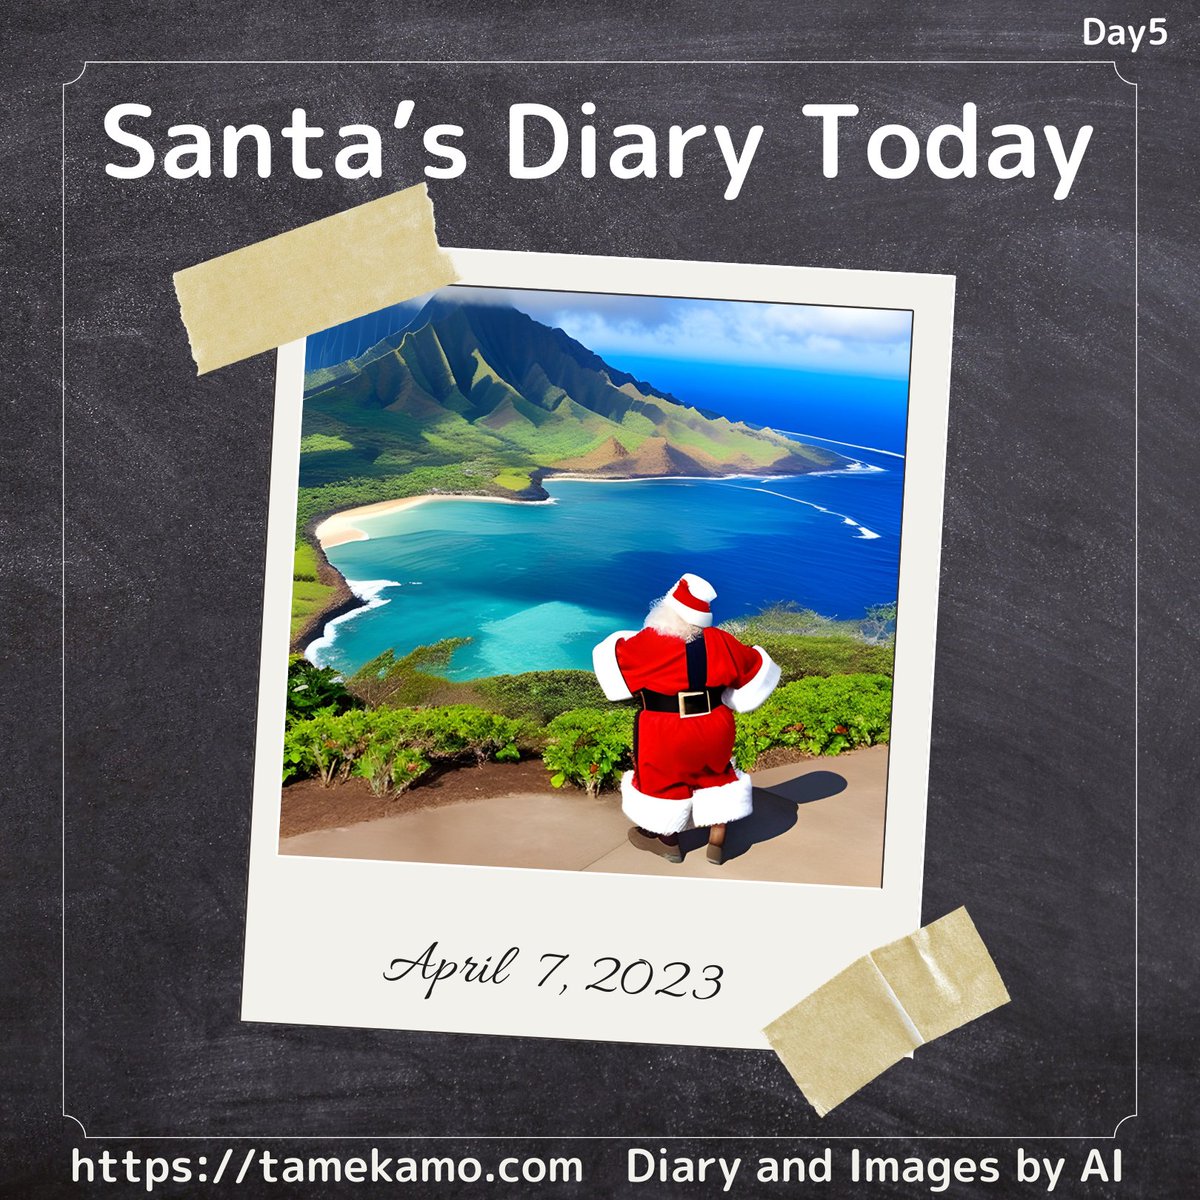 Day 5: Today, the reindeer and I went hiking together. It was a great experience to see mountains and waterfalls and get in touch with nature.

#texttoimage #AI #chatGPT #SantaDiary #WhereSanta #santanow #SantaTracker #TodaySanta